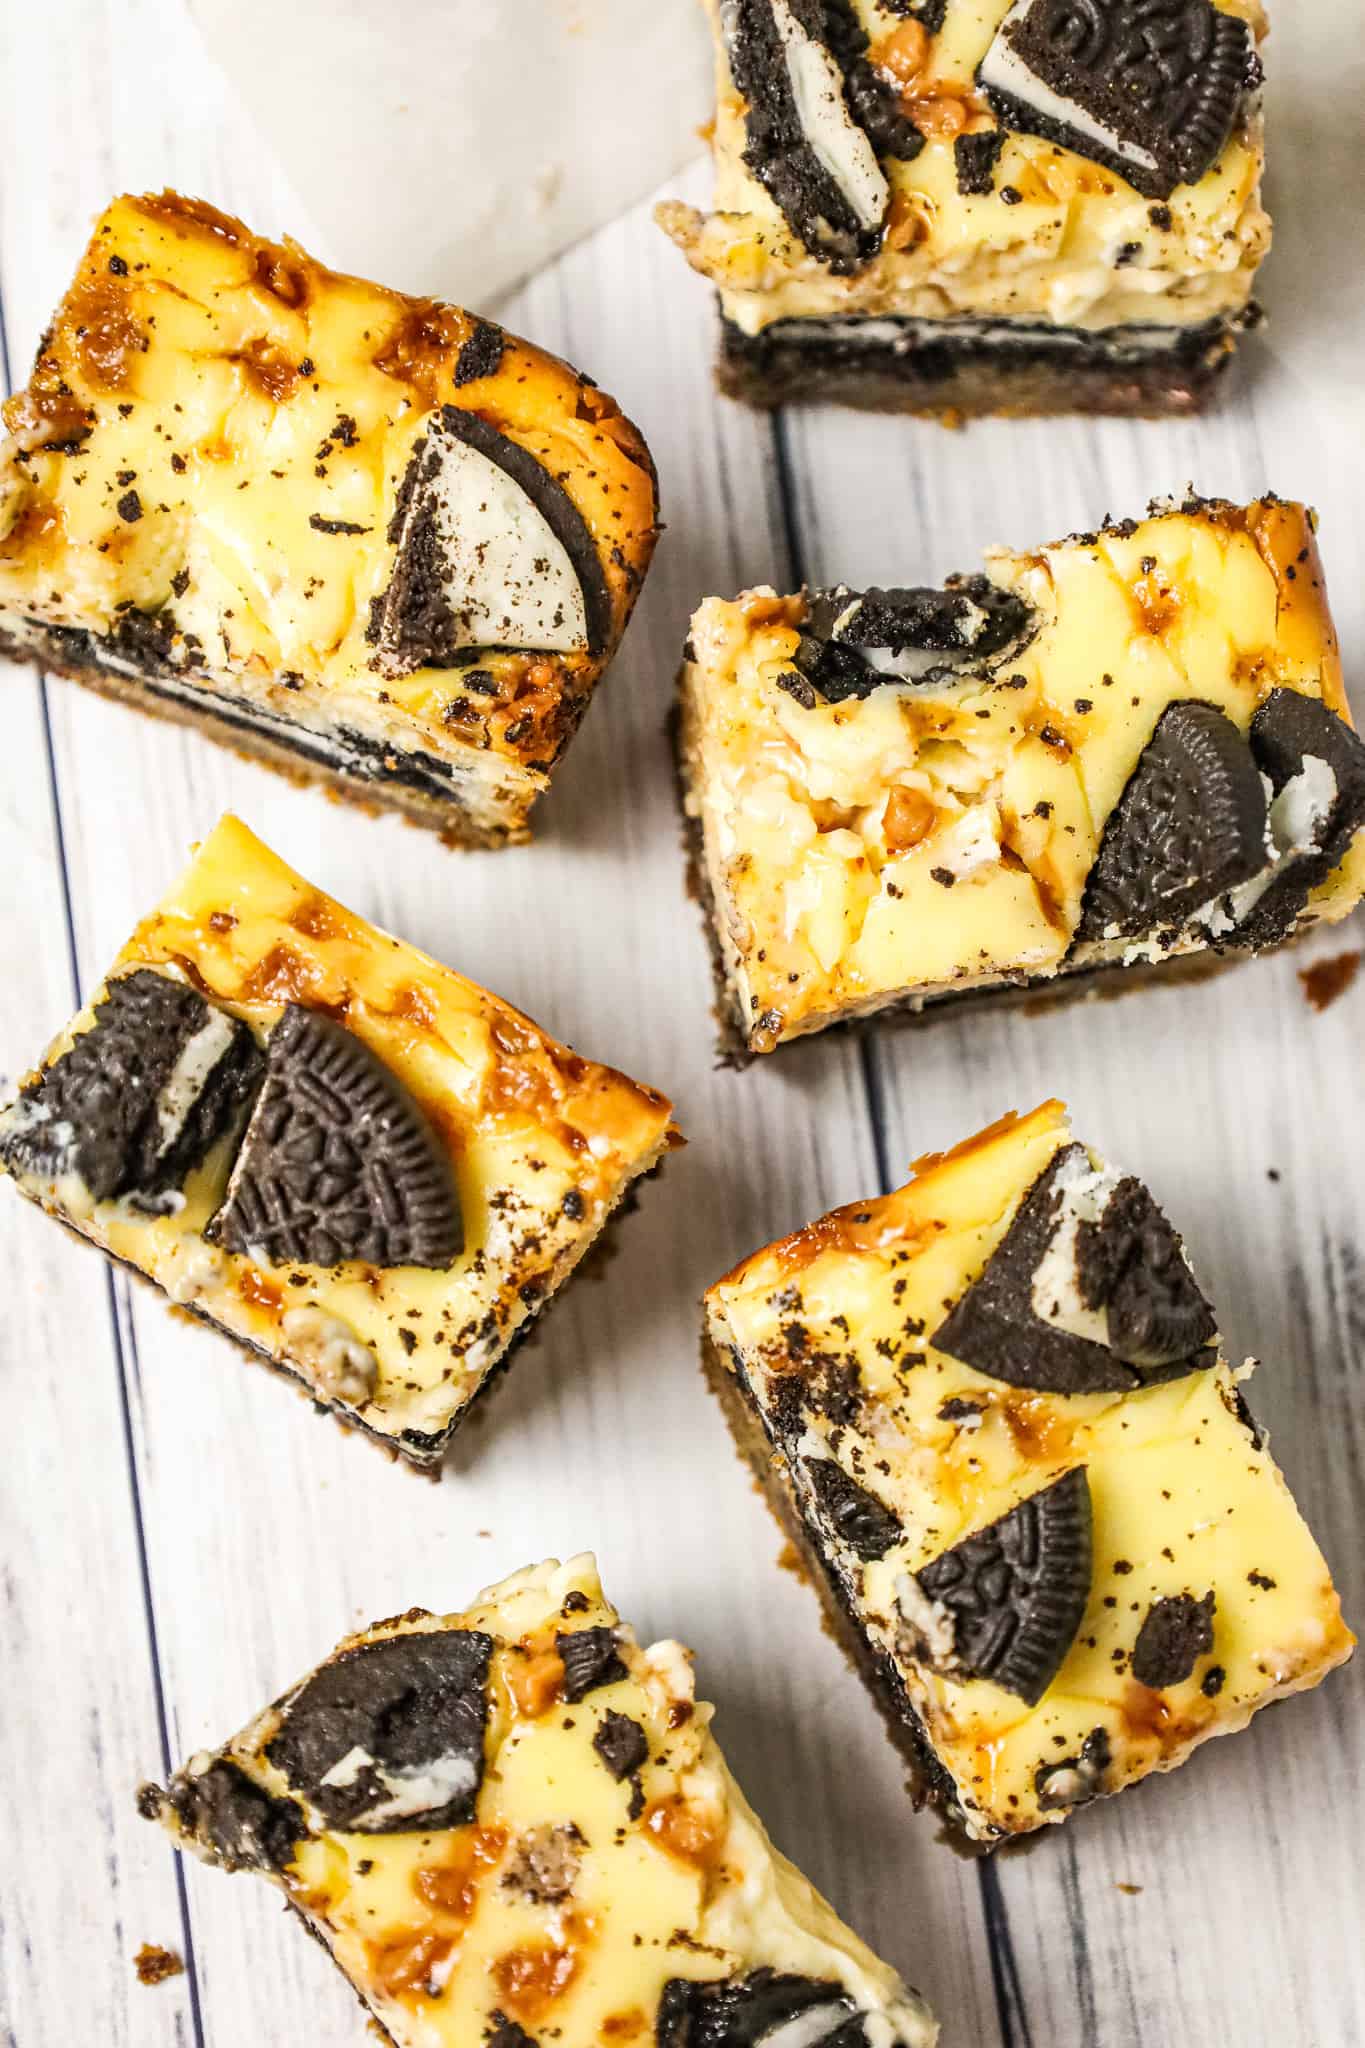 Slutty Cheesecake Bars are a decadent dessert recipe with a base of chocolate chip cookie dough topped with Oreo cookies, cheesecake and Skor toffee bits.